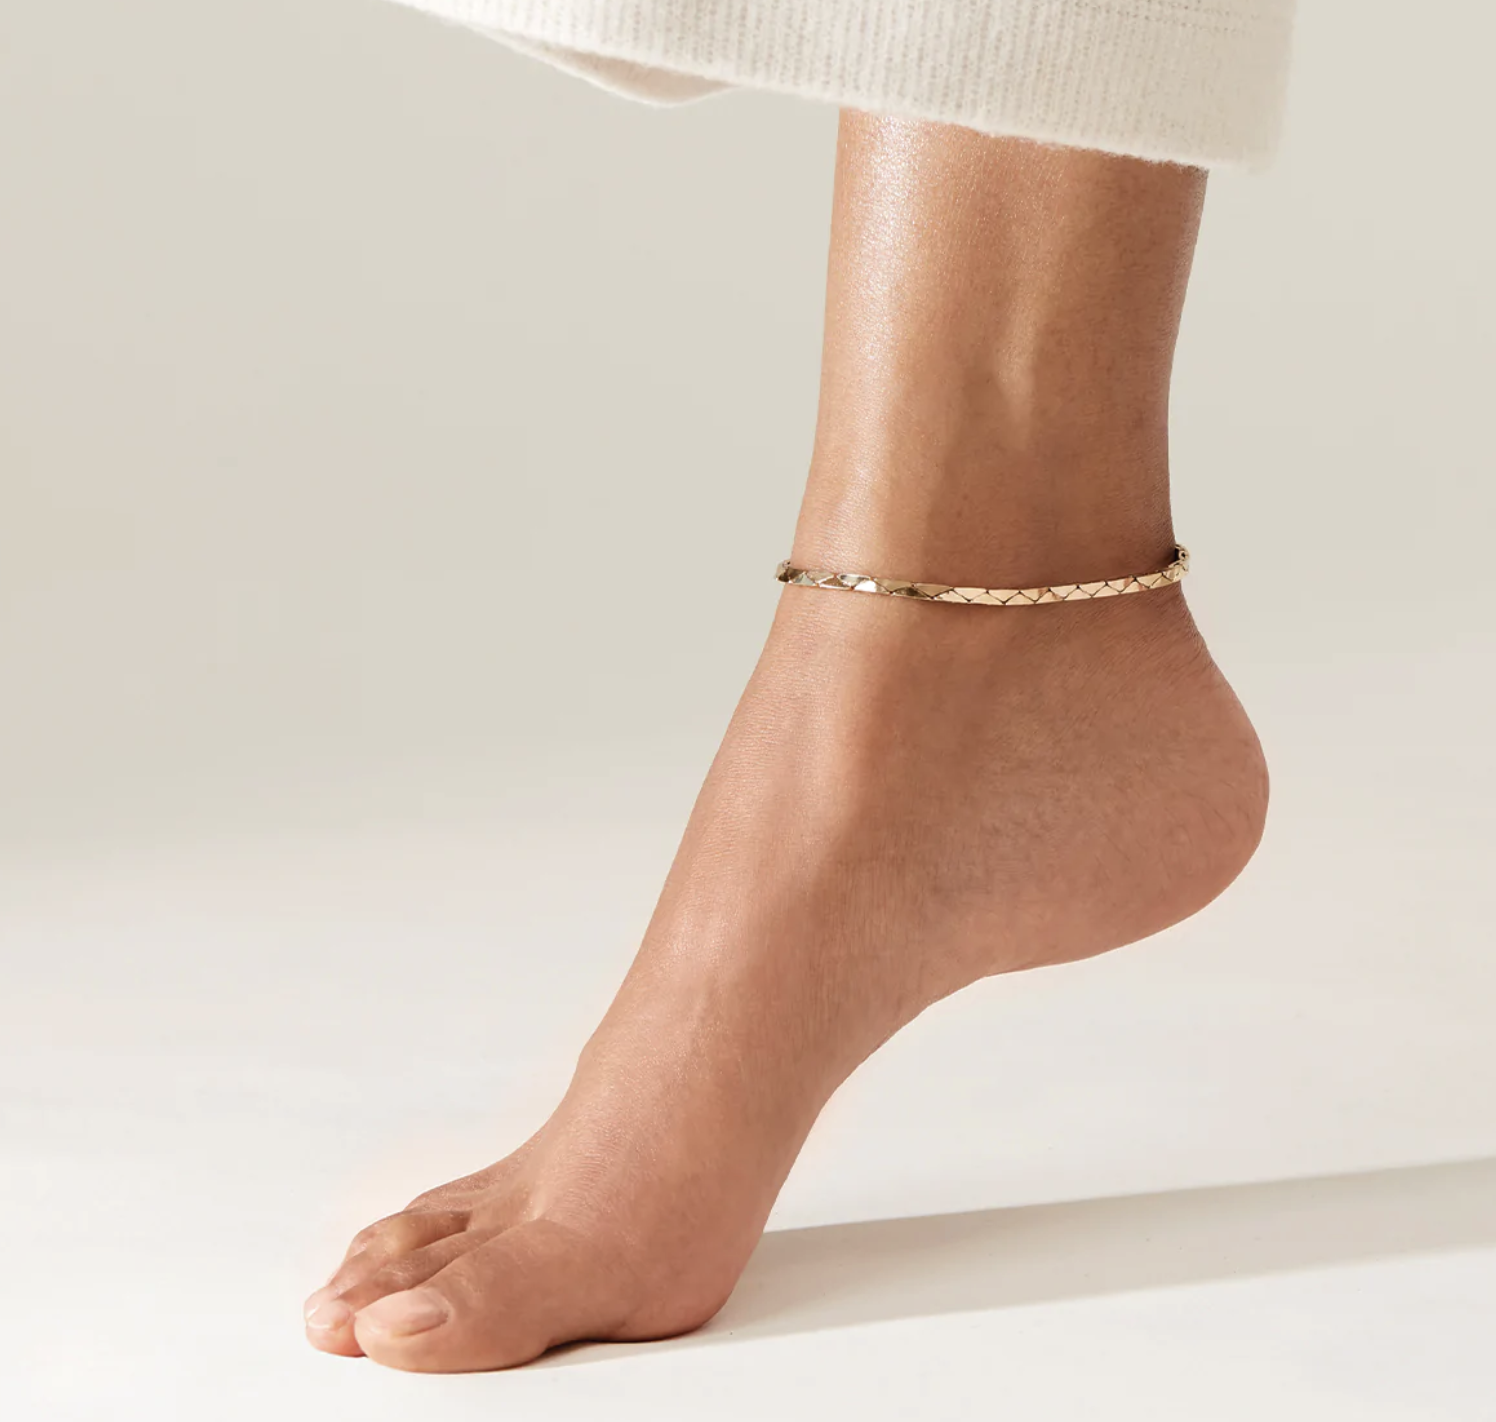 A person wearing the anklet